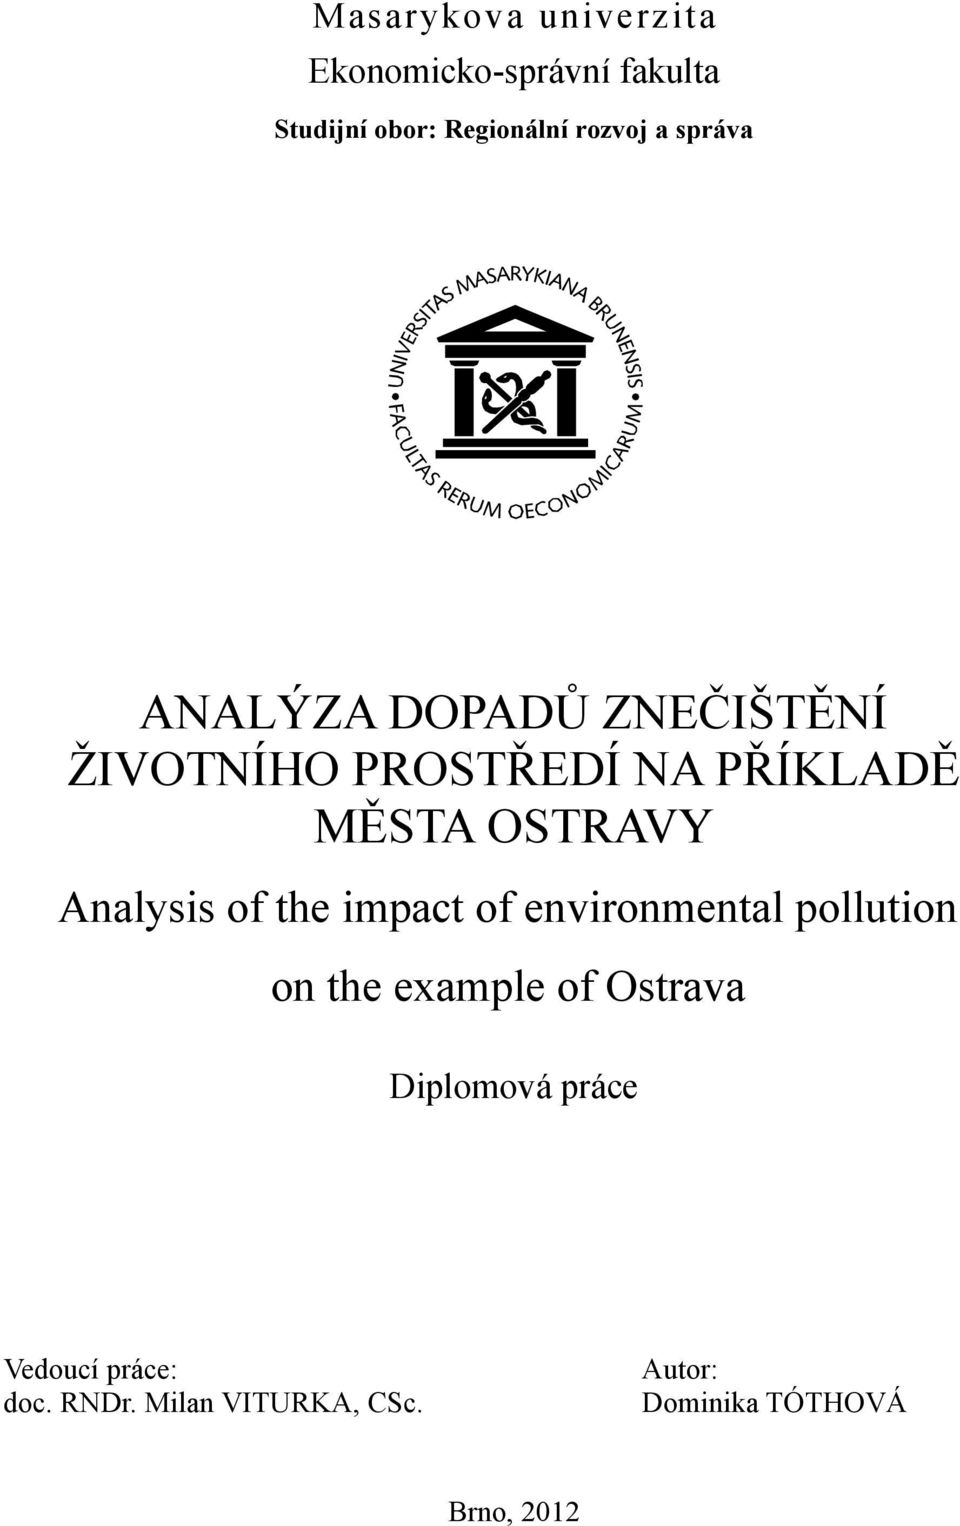 OSTRAVY Analysis of the impact of environmental pollution on the example of Ostrava